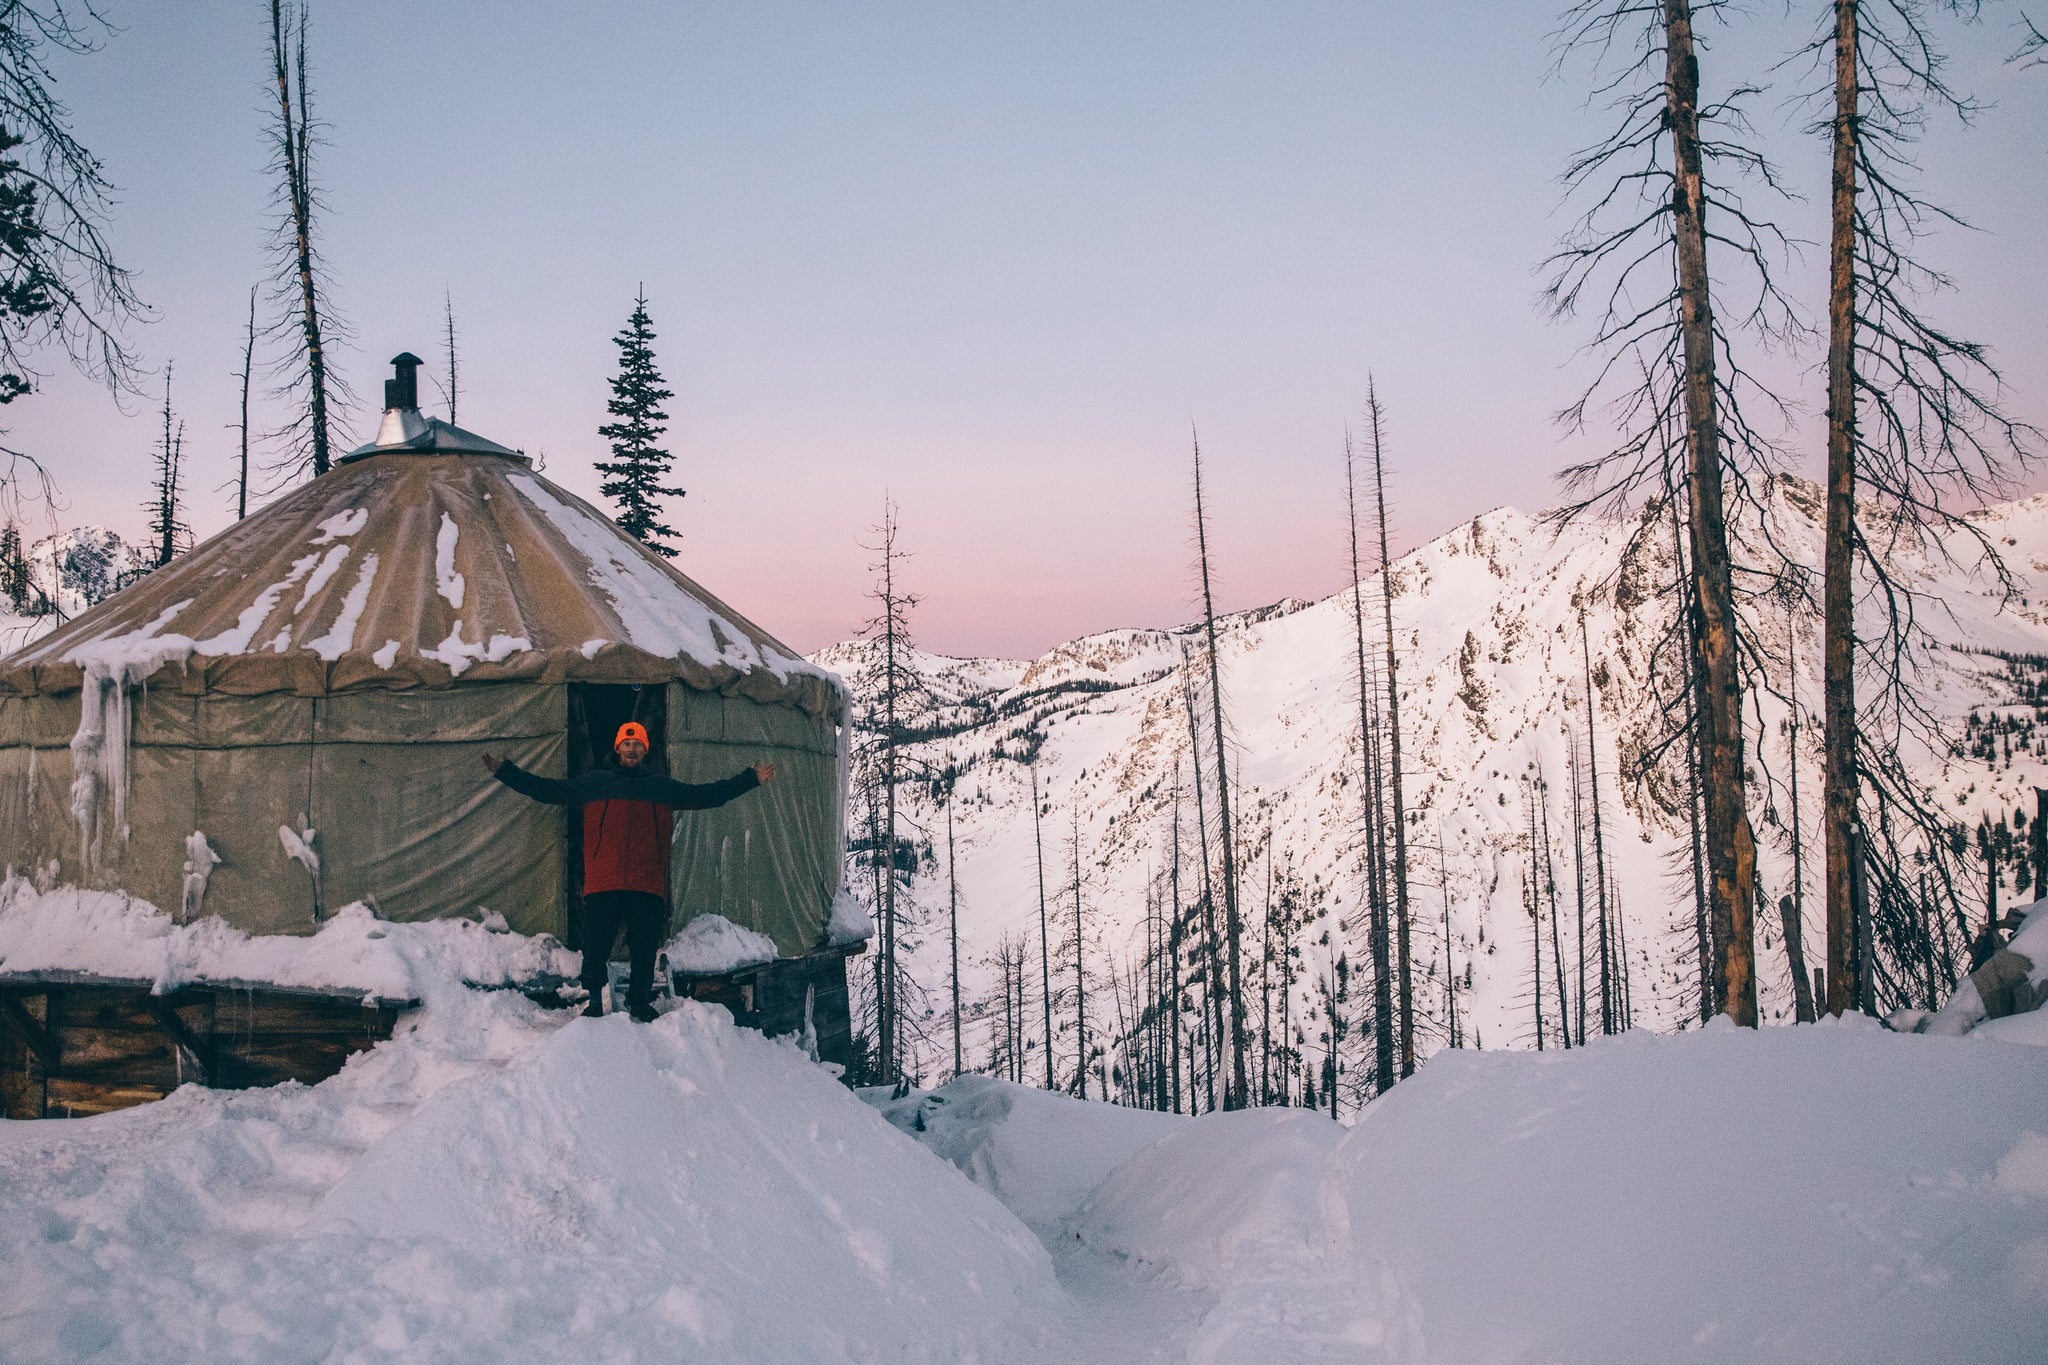 The Best Ways to Keep Your Beer Cold in the Backcountry